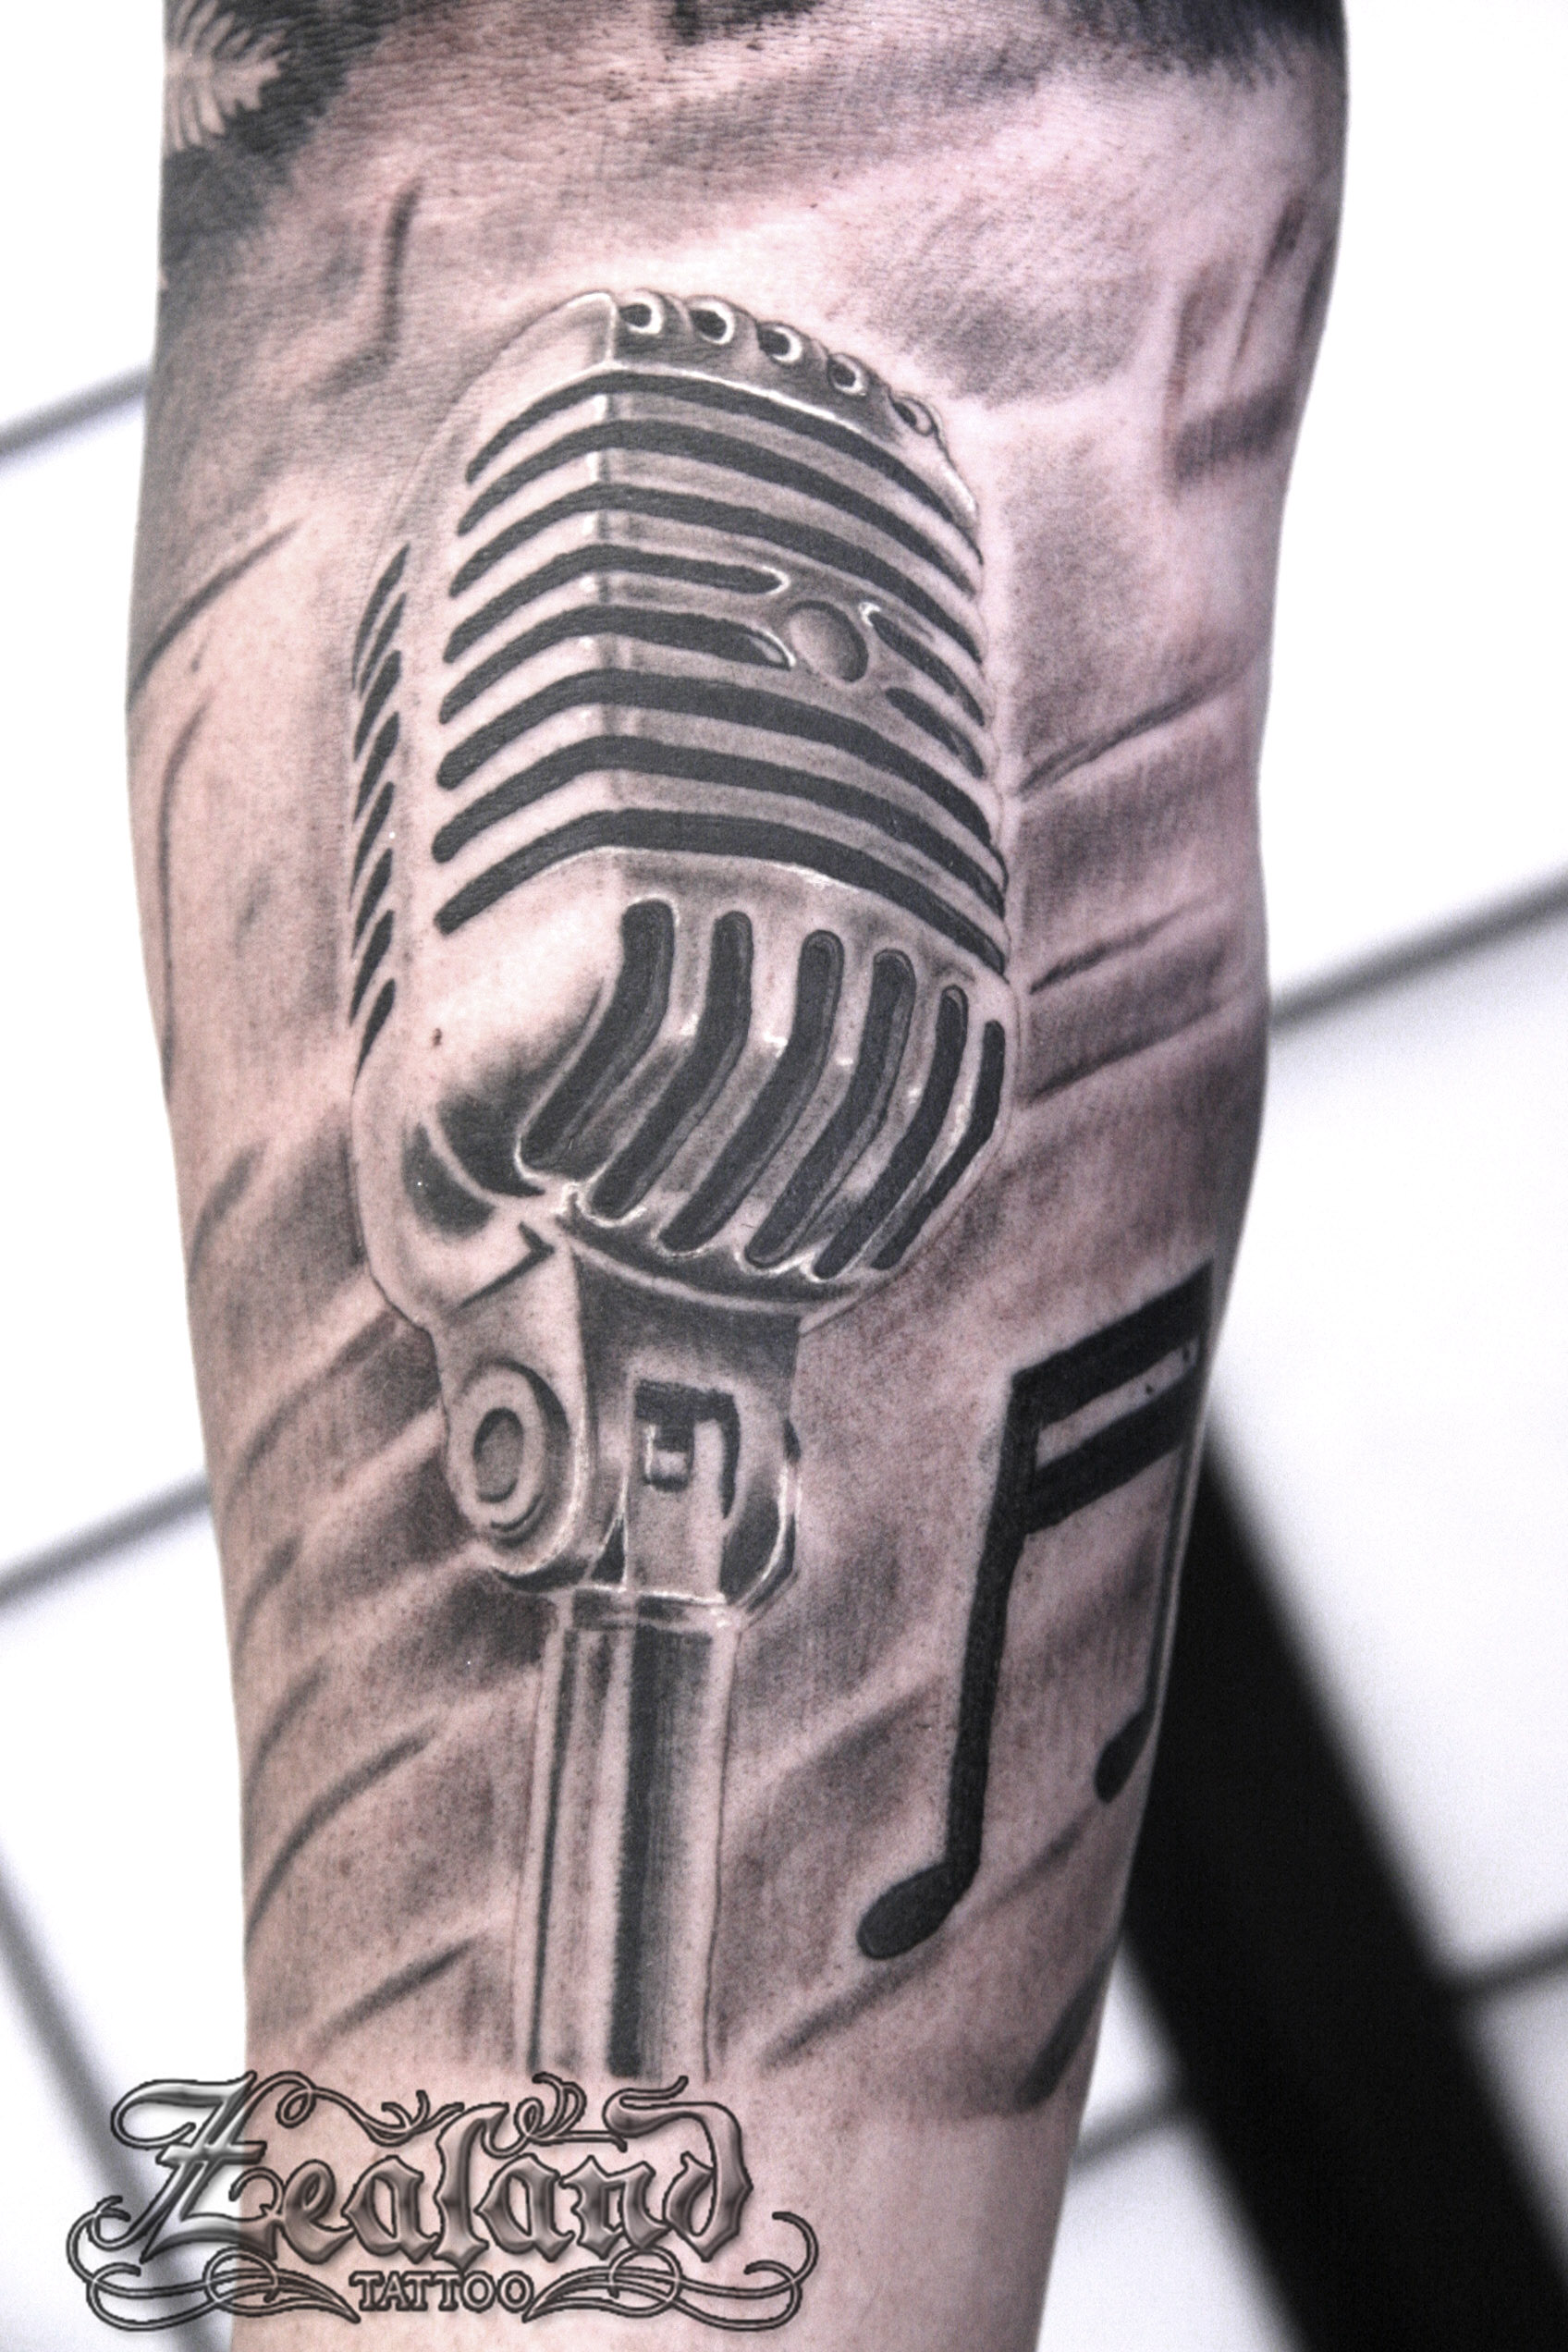 Single needle microphone tattoo on the right inner arm